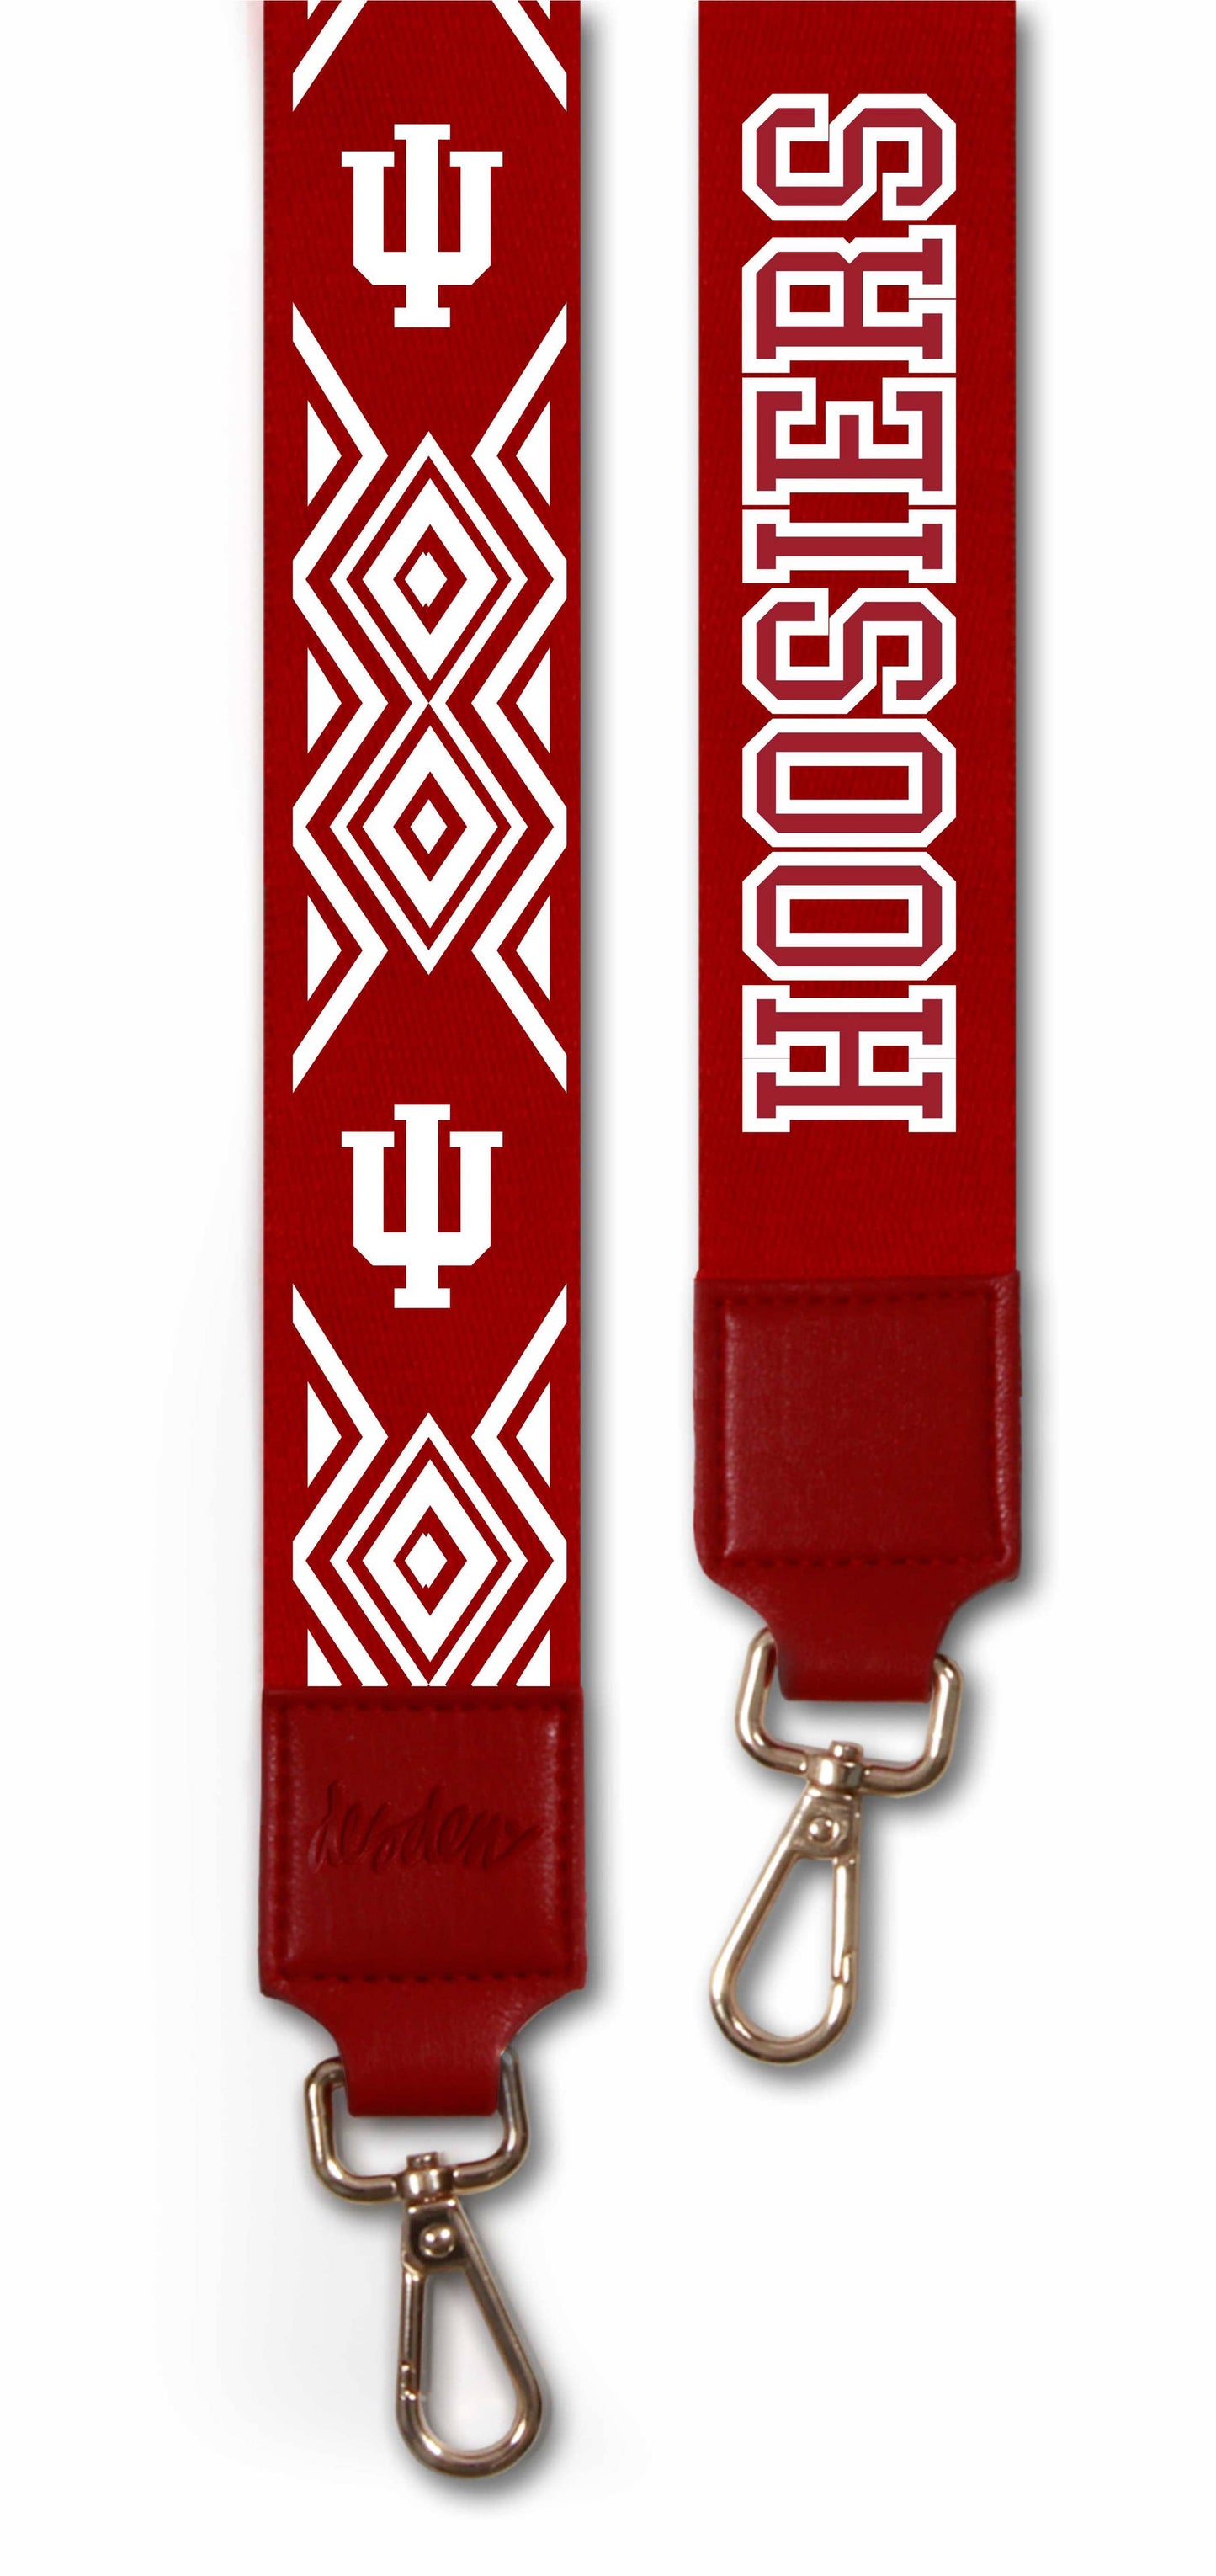 2" wide Printed Purse Strap - Indiana University